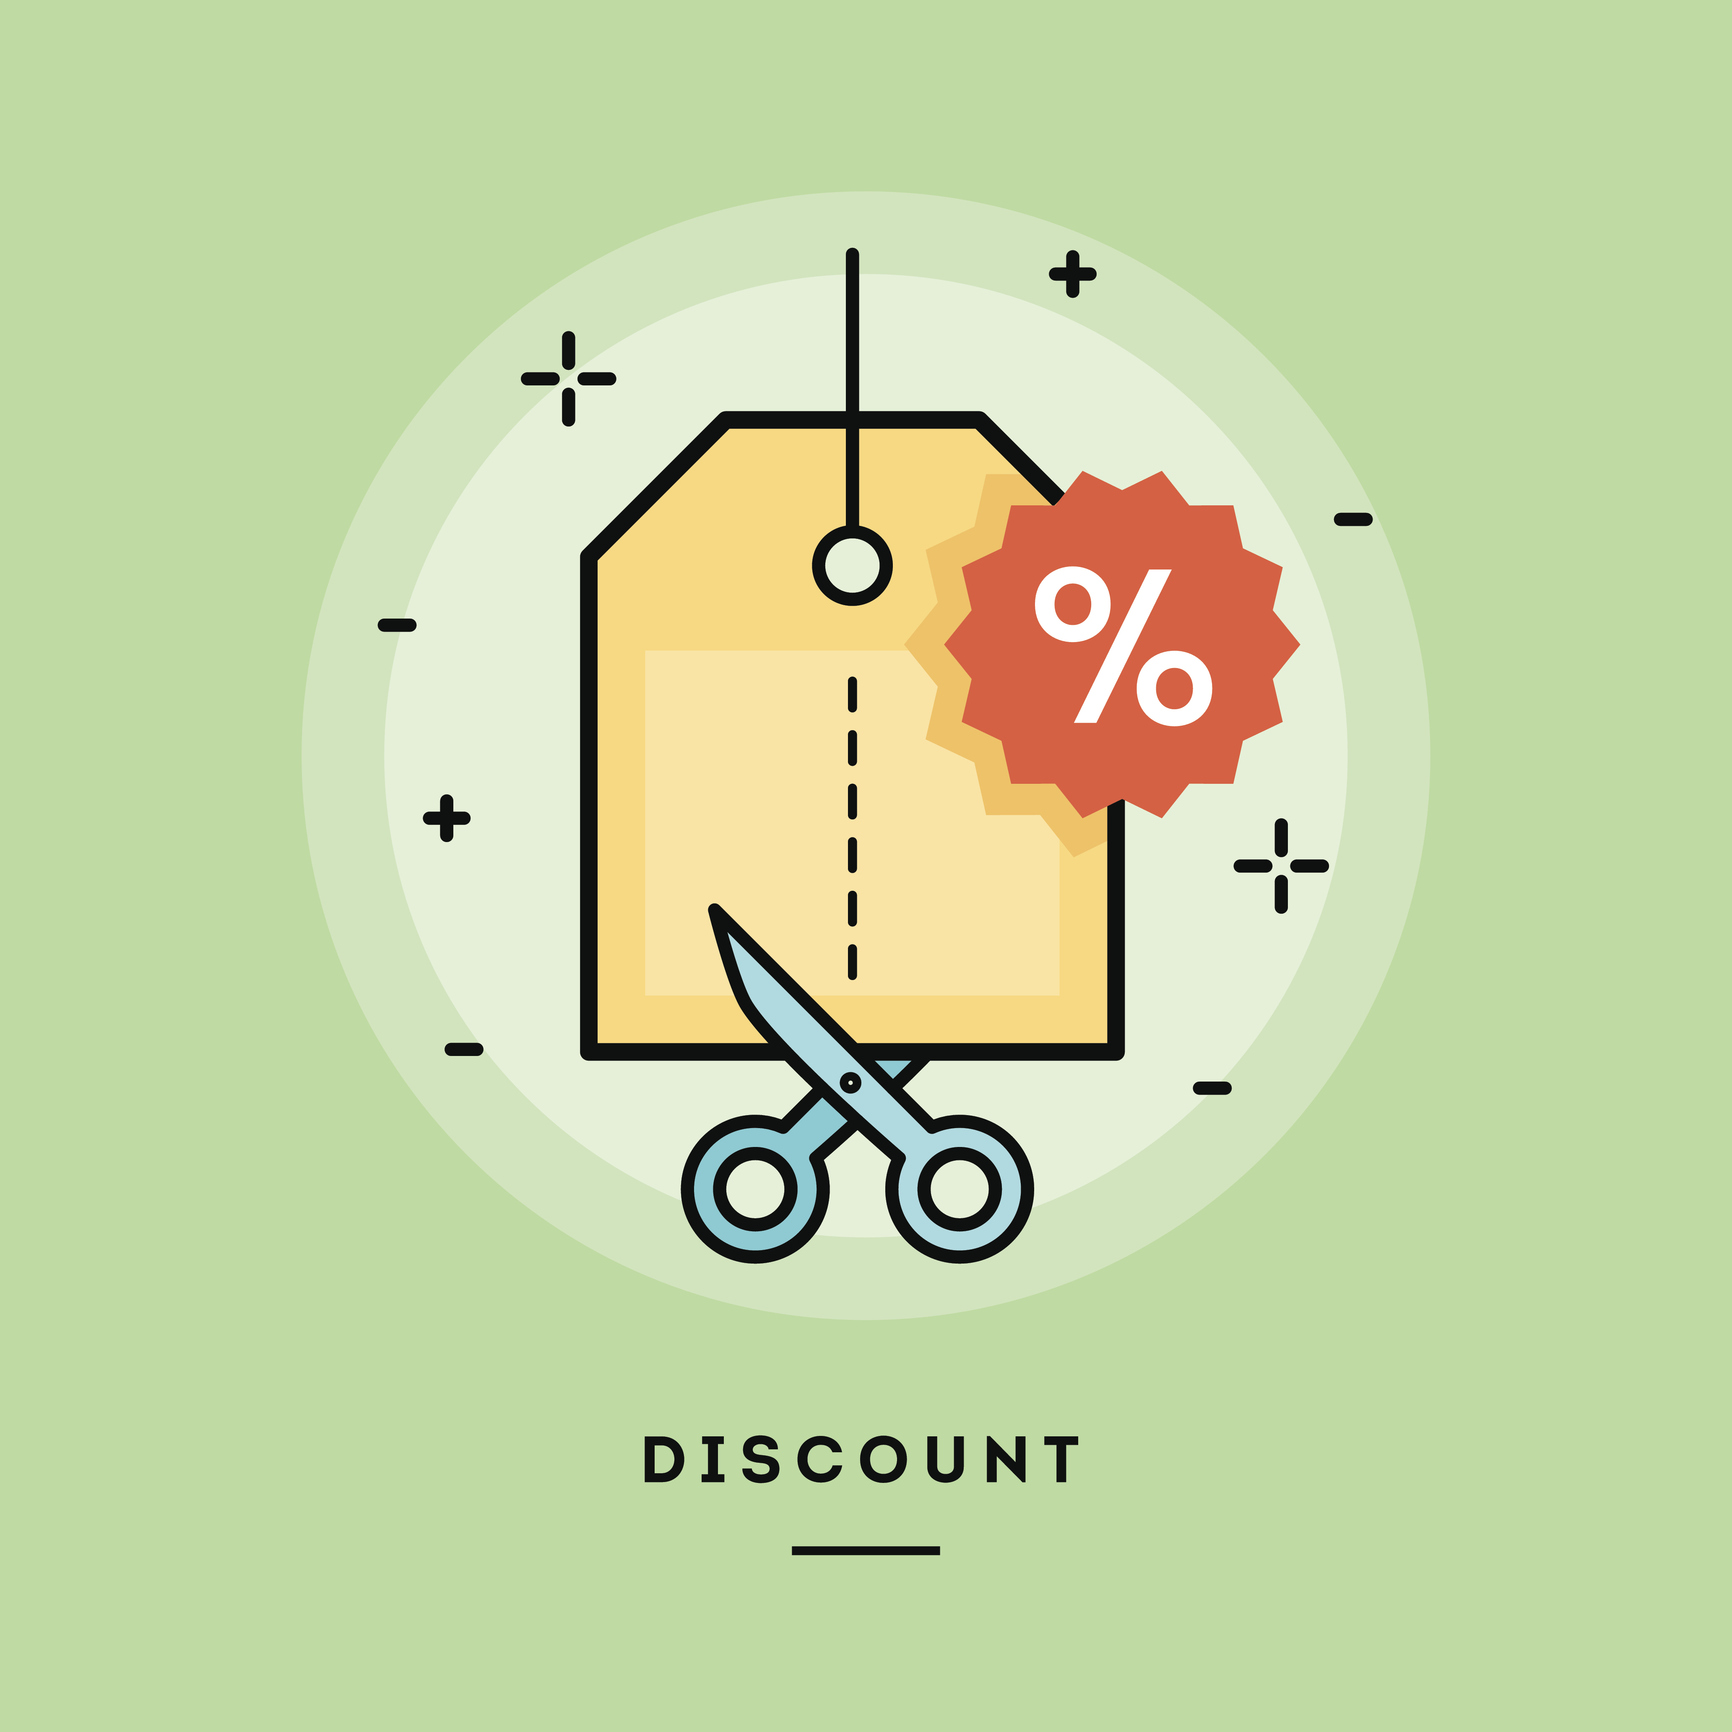 discounts and coupons as a marketing strategy